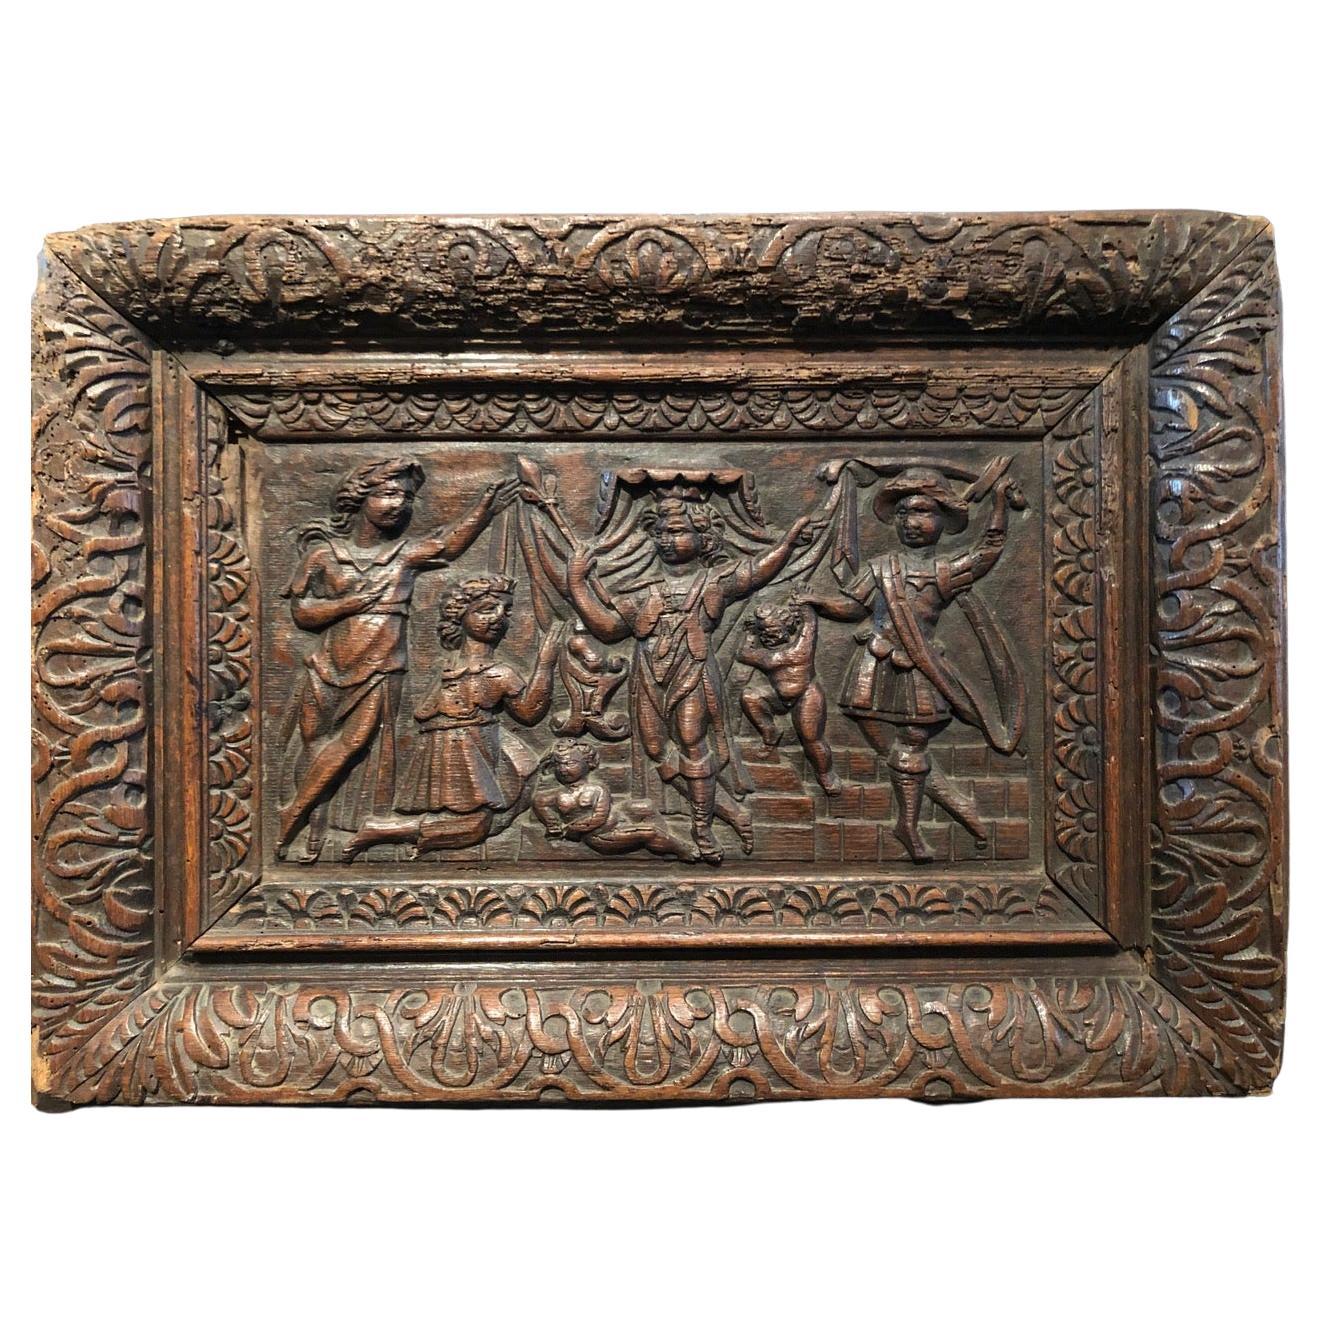 The Massacre of the Innocents
Carved oak panel
Normandy, late 16th century
(Collection labels on the back)
Measures: 43,5 x 61 cm.
 